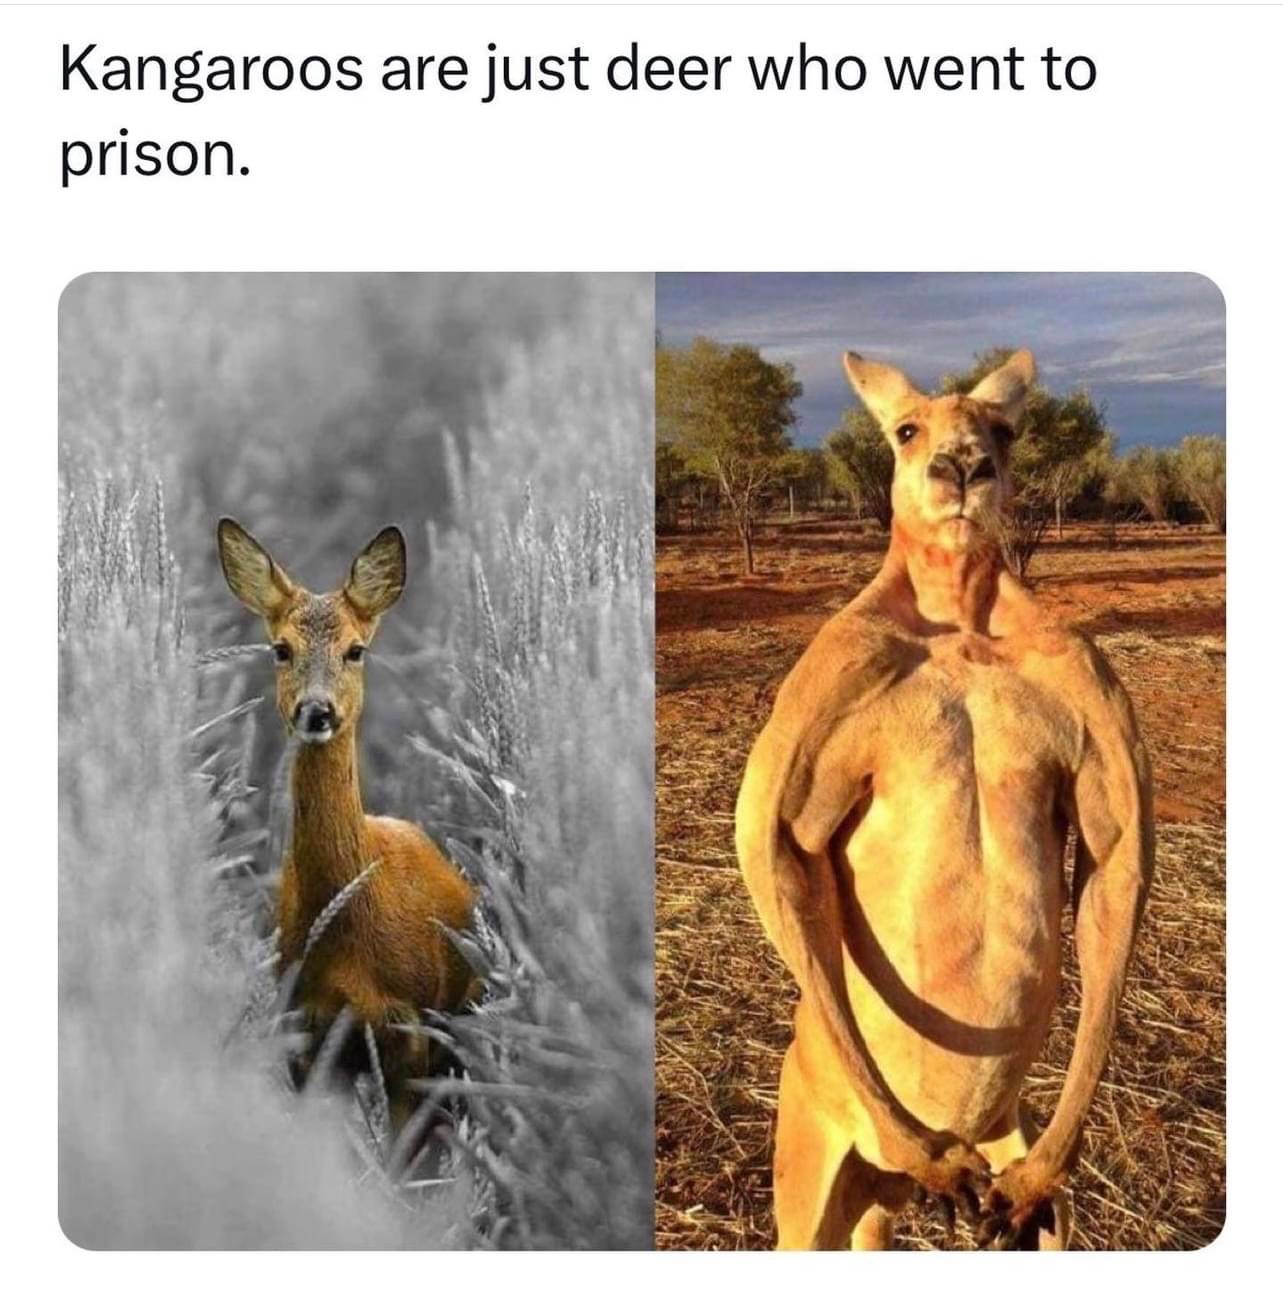 kangaroos are just dear that went to prison